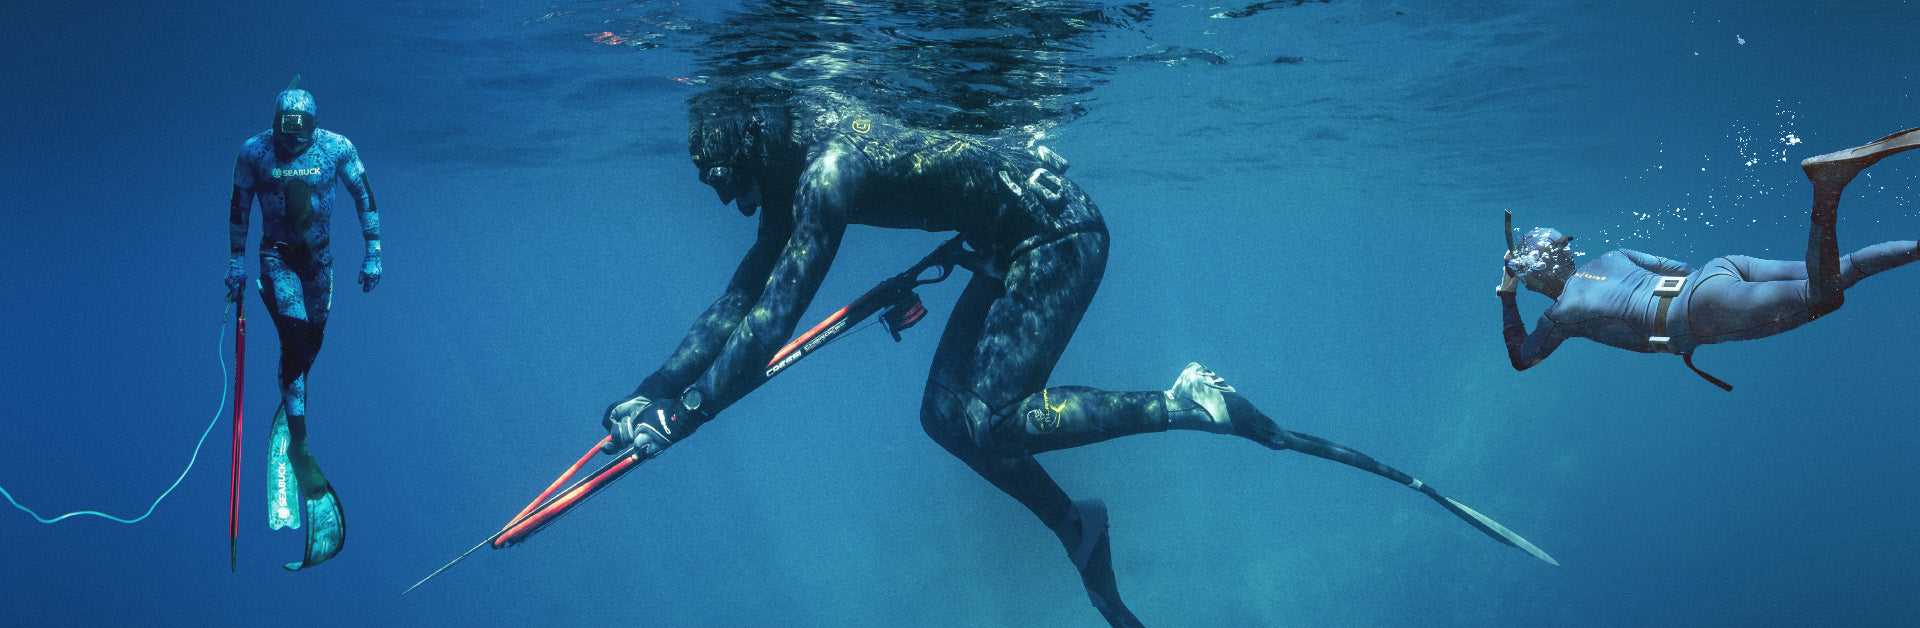 Spearfishing Gear and Equipment Online Shop